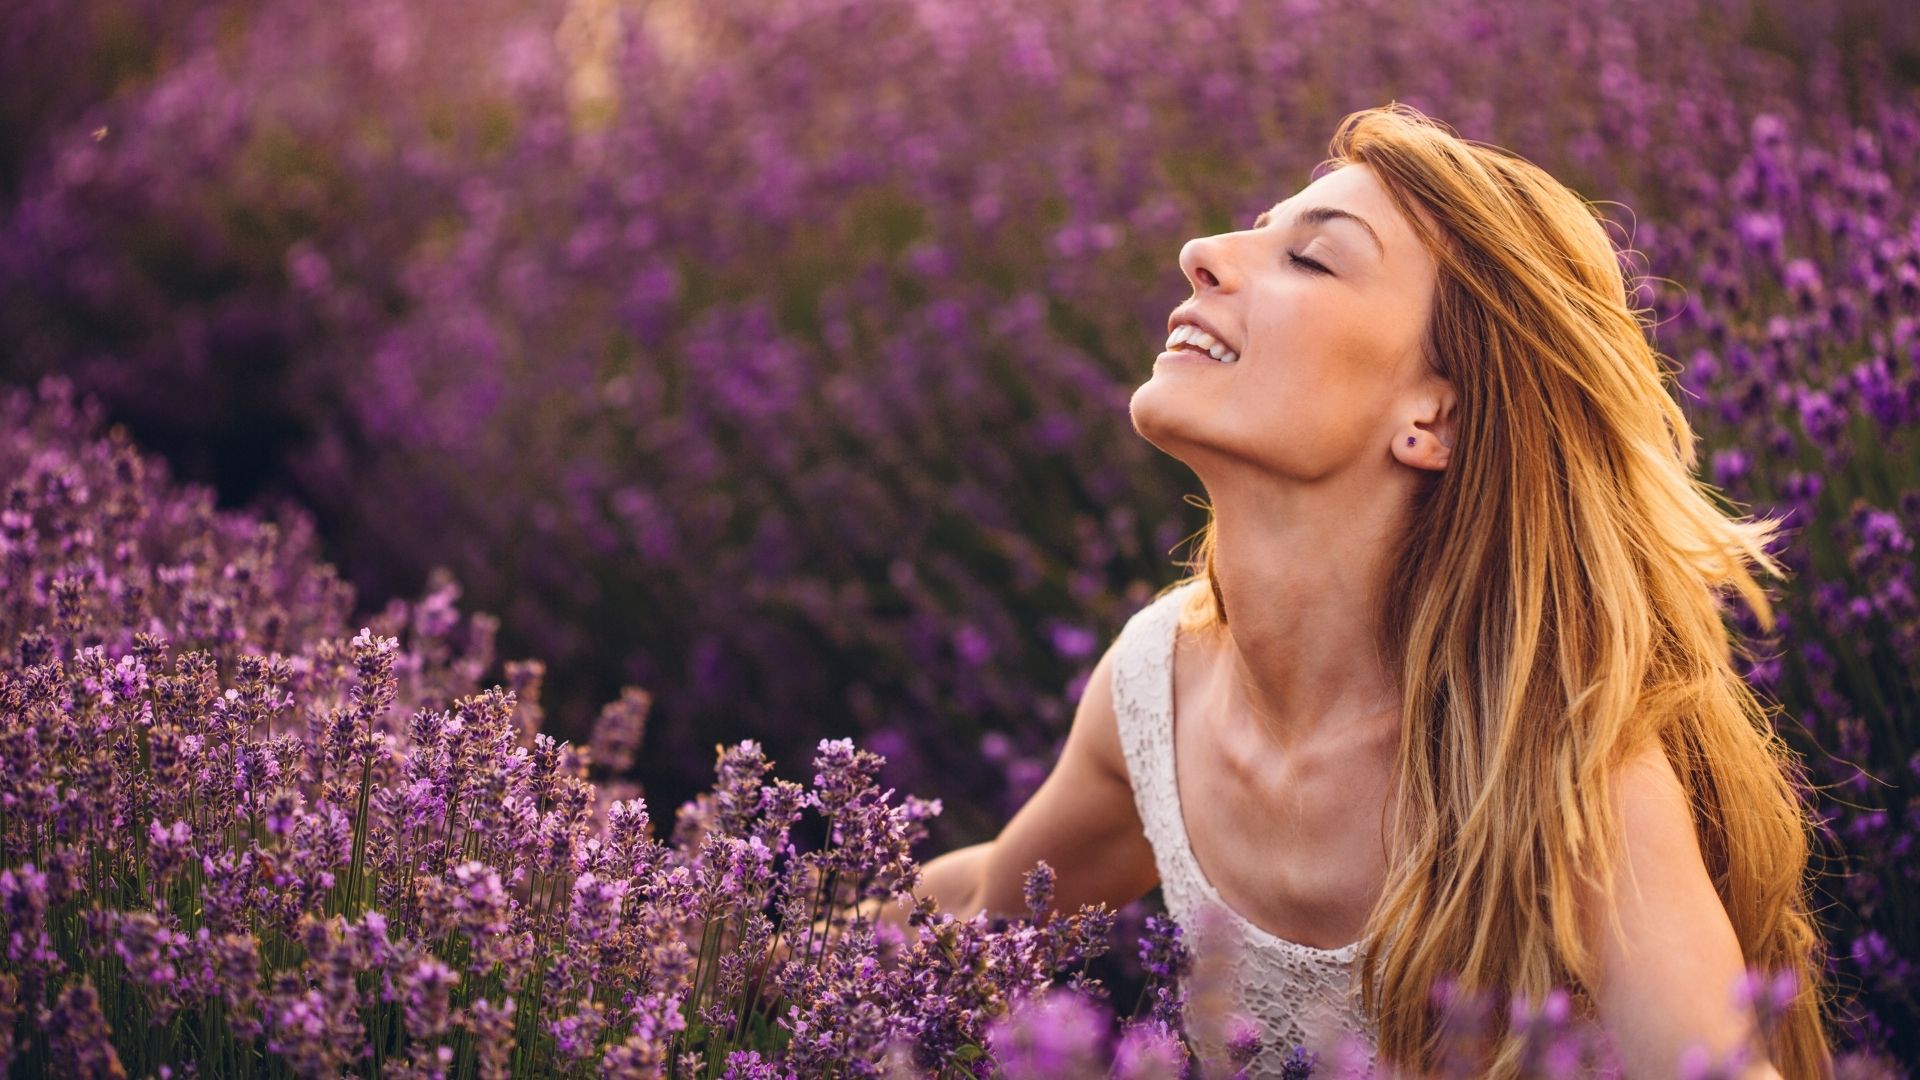 A woman breathing in the wonderful smell of flowers